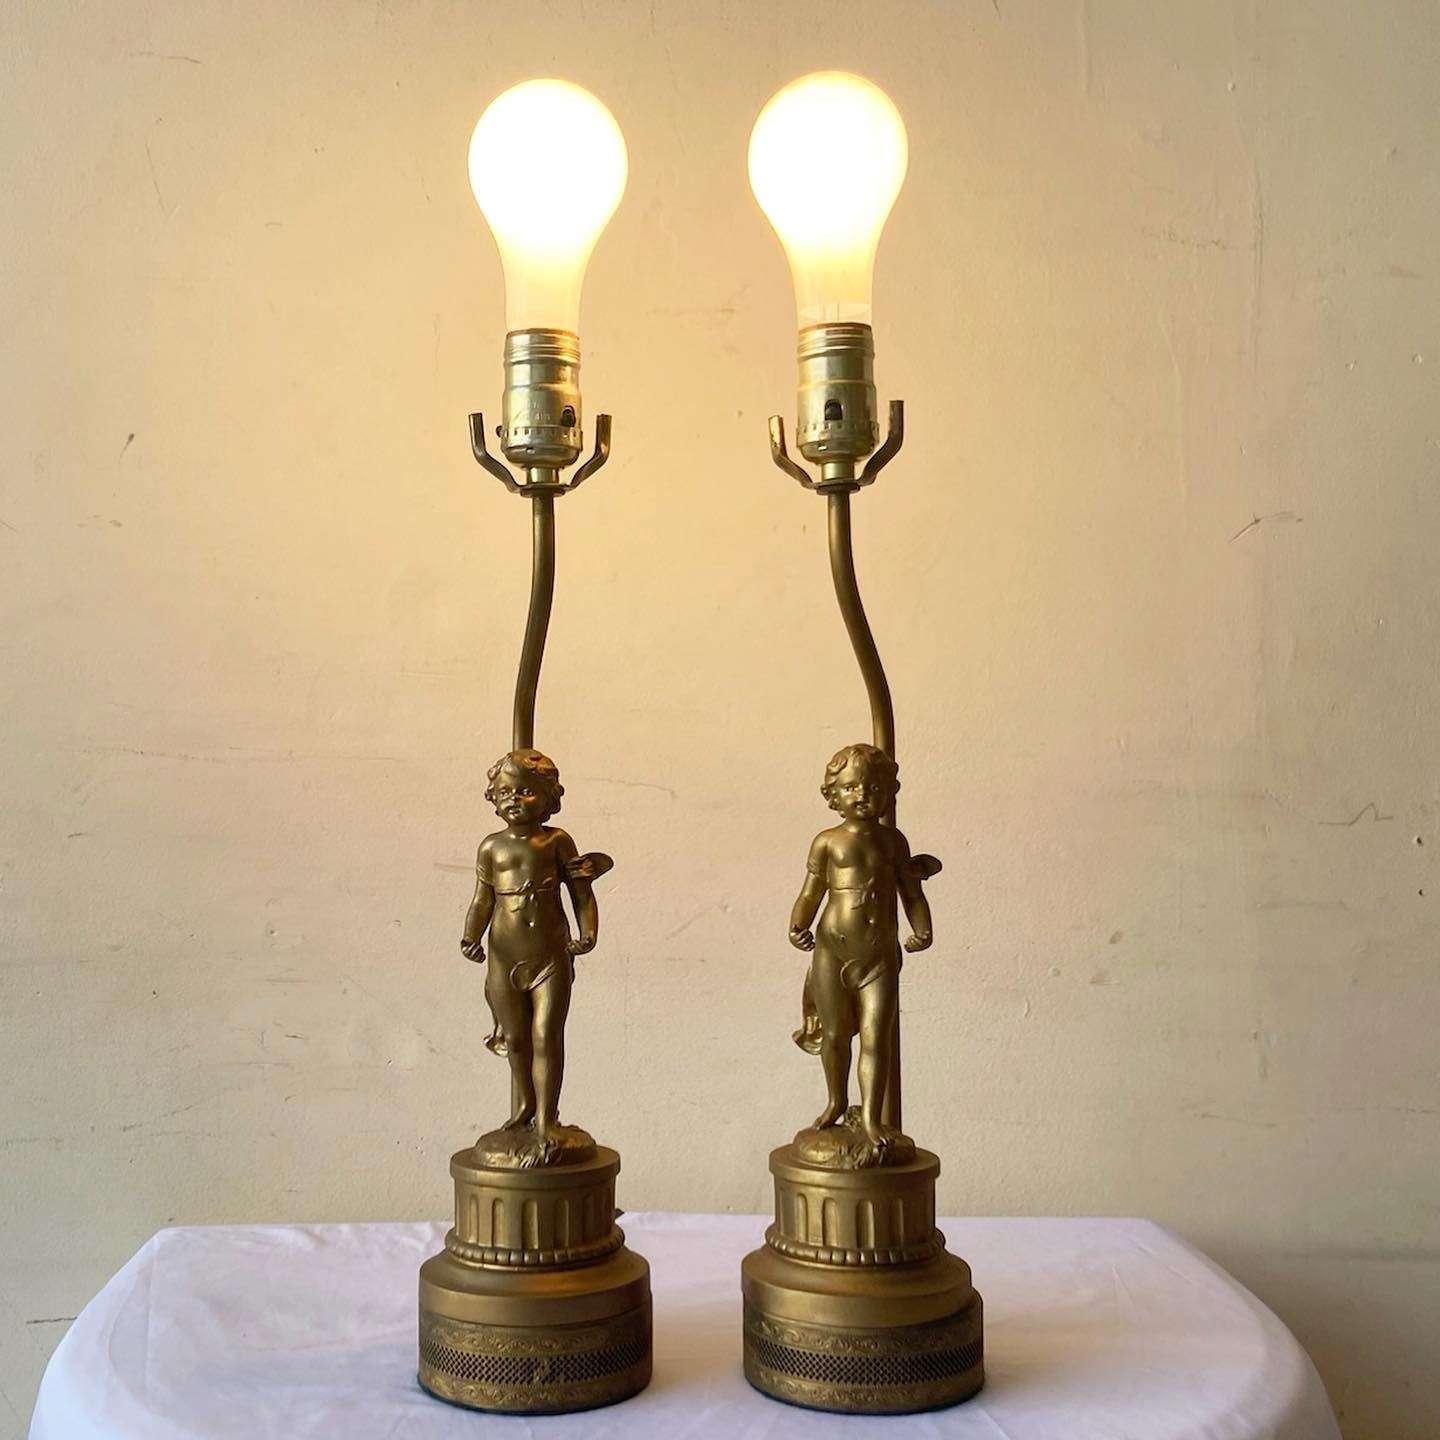 French Gilt Cherub Figural Torch Table Lamps - a Pair In Good Condition For Sale In Delray Beach, FL